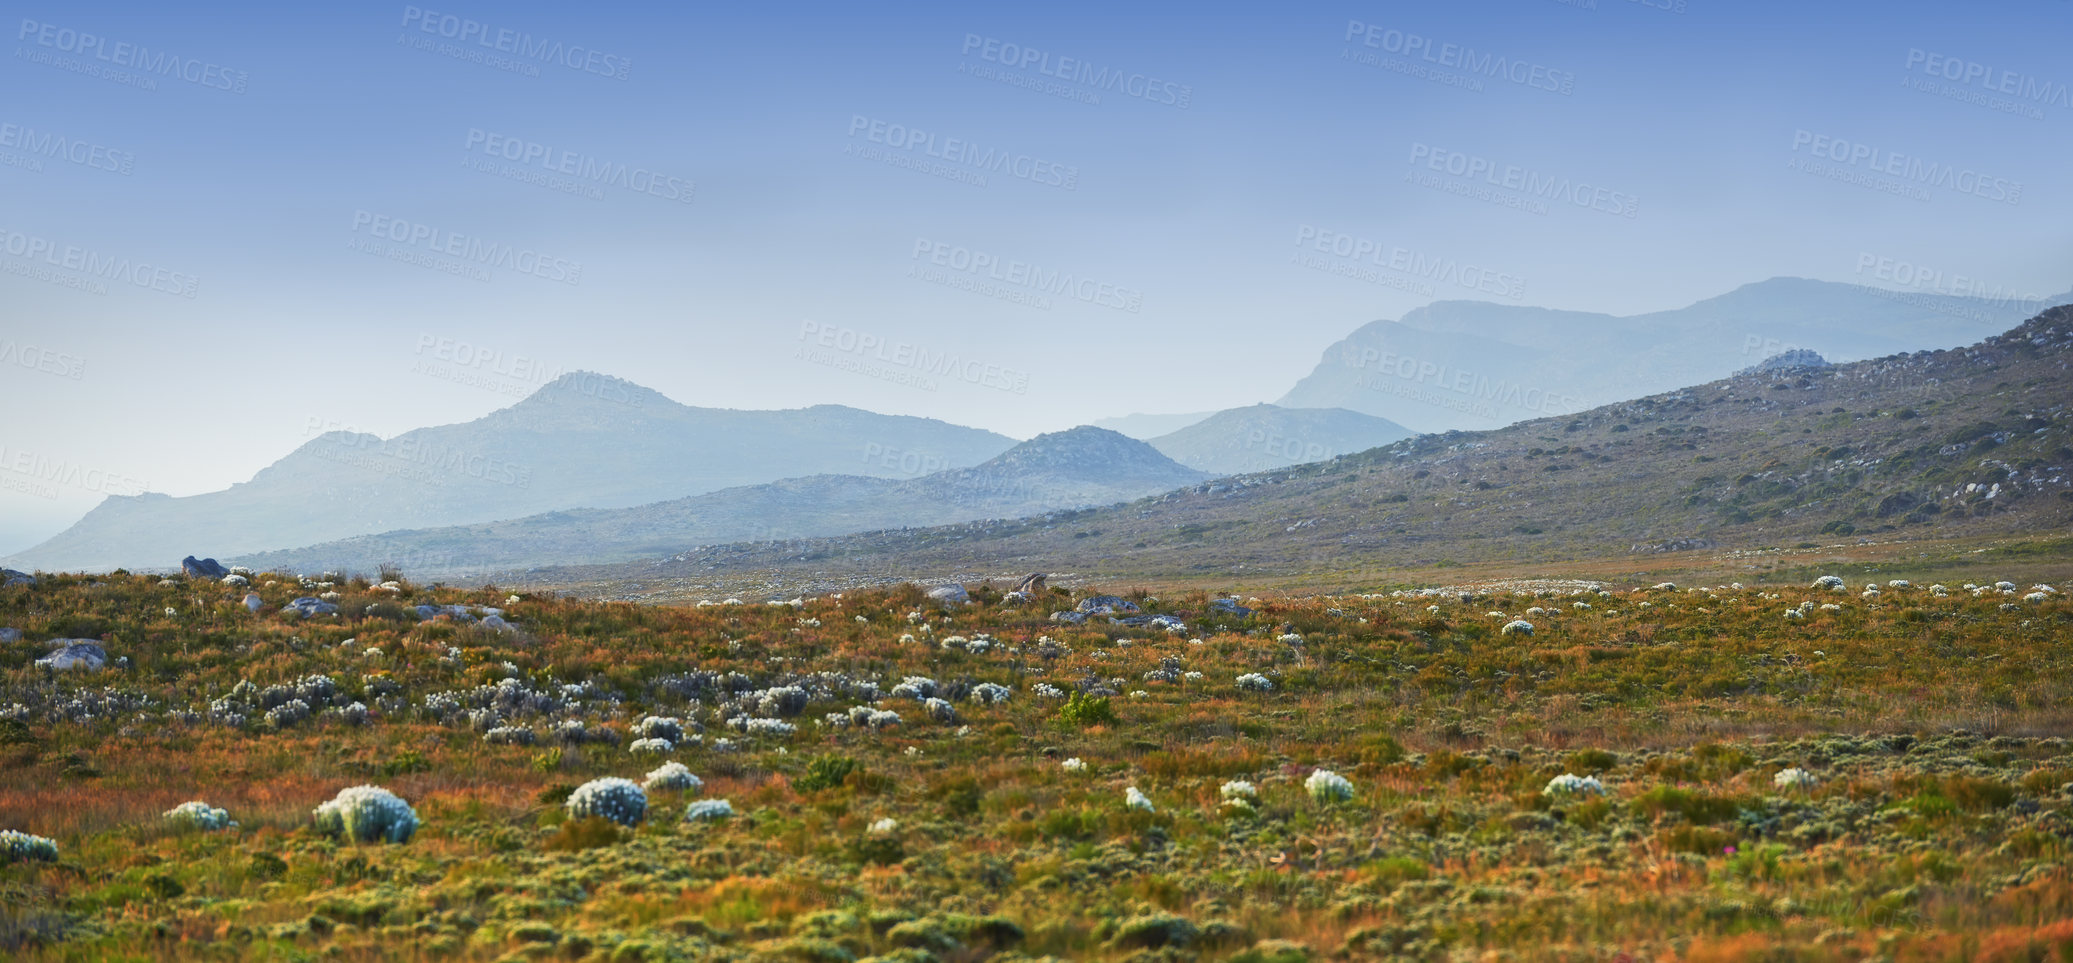 Buy stock photo Mountain, field and bush landscape with grass on rock, texture or countryside in Africa like heaven. Morning, outdoor and banner of hill with biodiversity in environment with flowers and stone